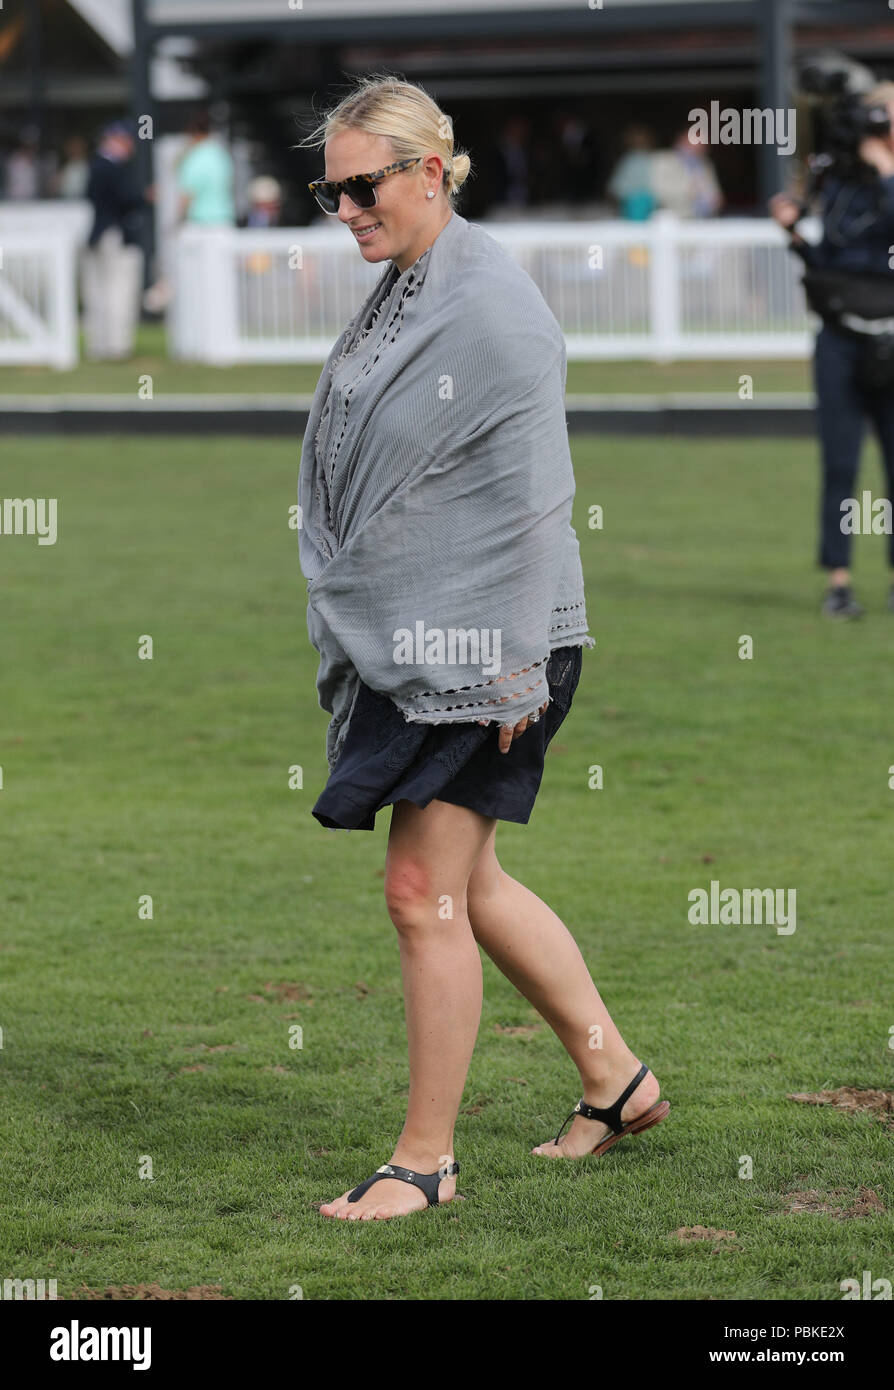 Zara Tindall treads in at half time during the International Day at the Royal County of Berkshire Polo Club in Winkfield, Windsor. Stock Photo